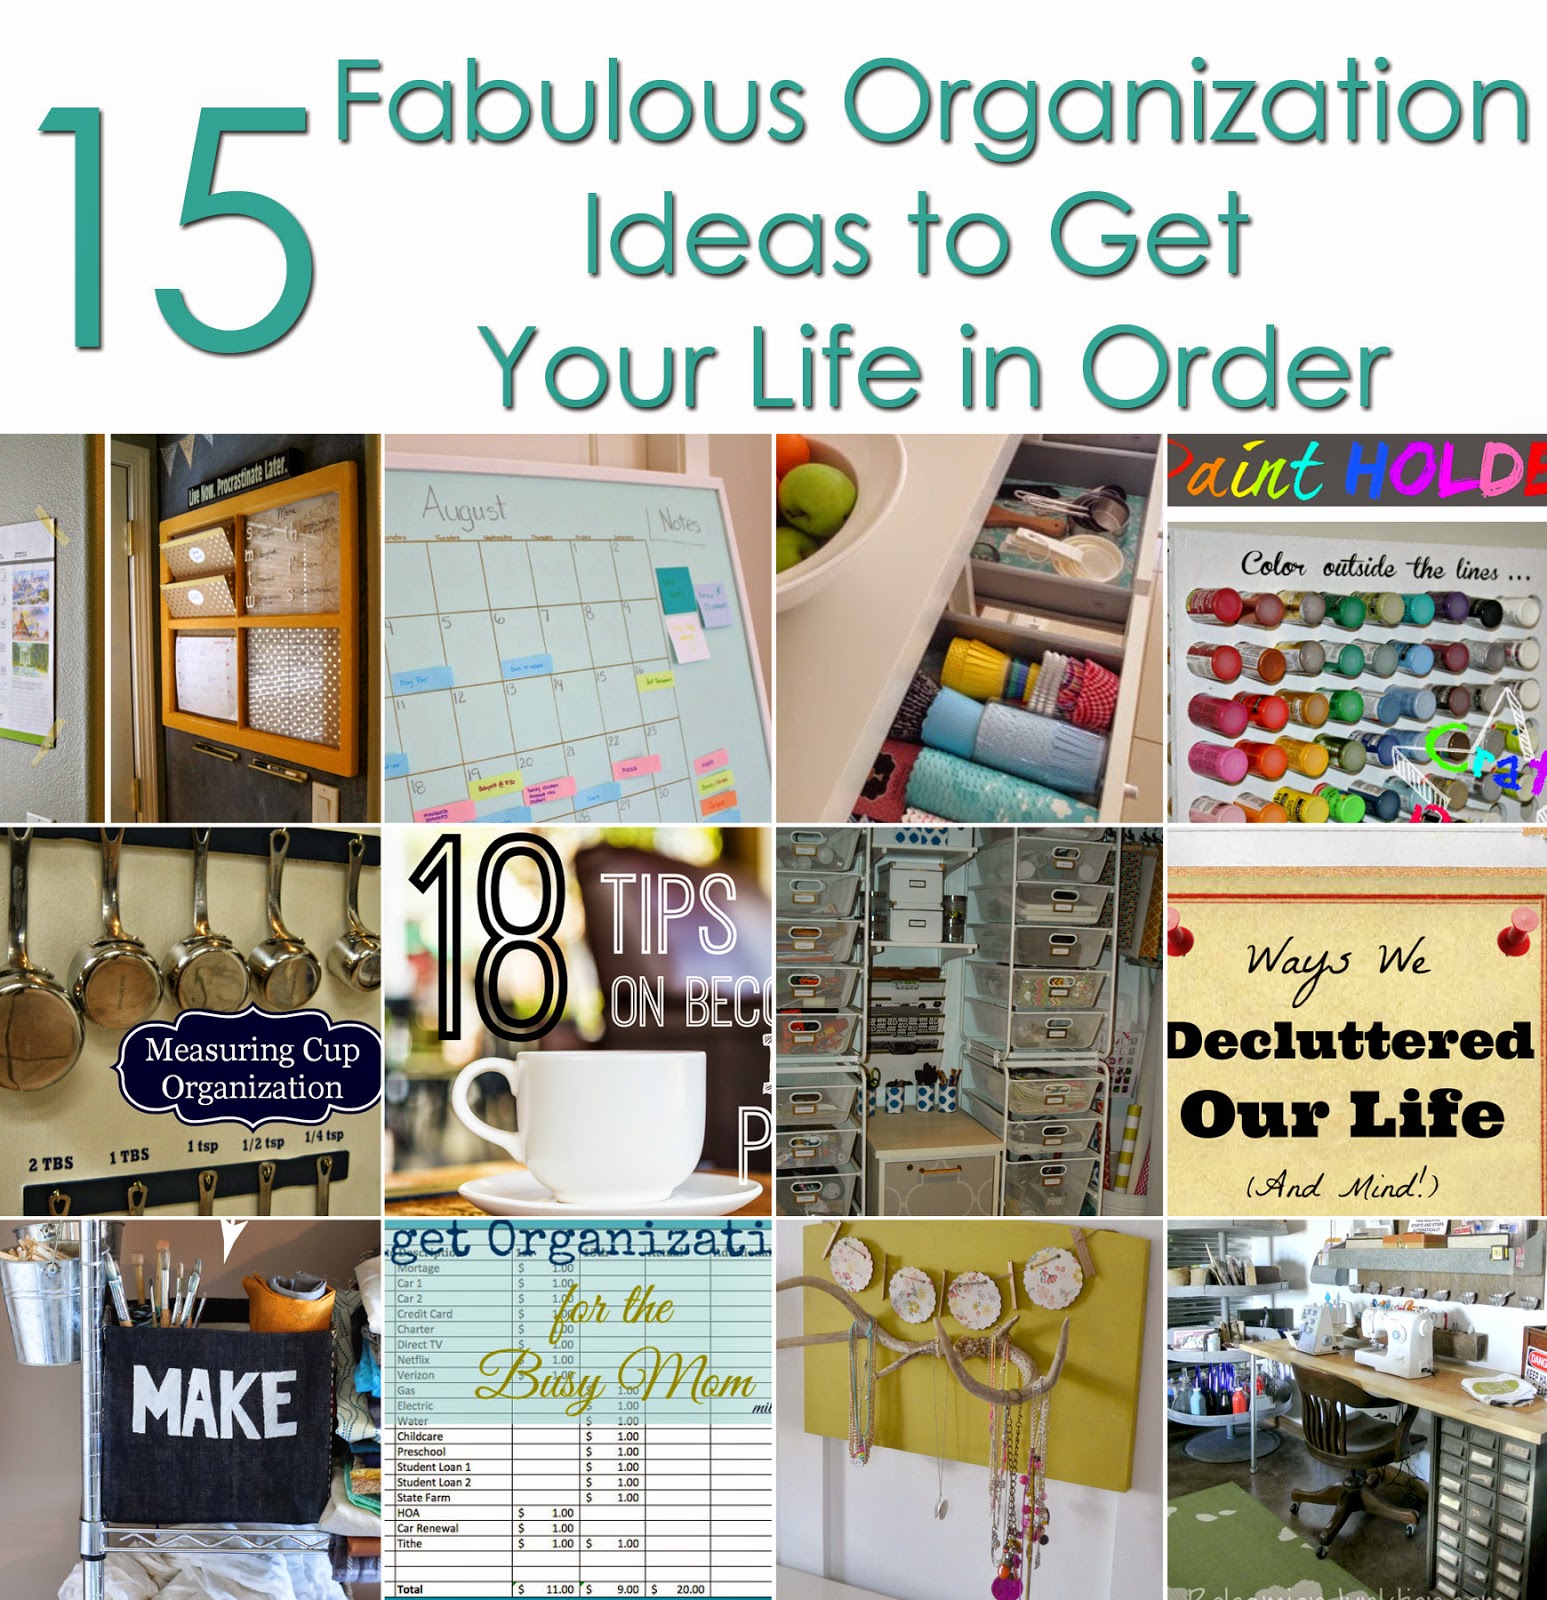 15 Fabulous Organization Ideas to Get Your Life in Order